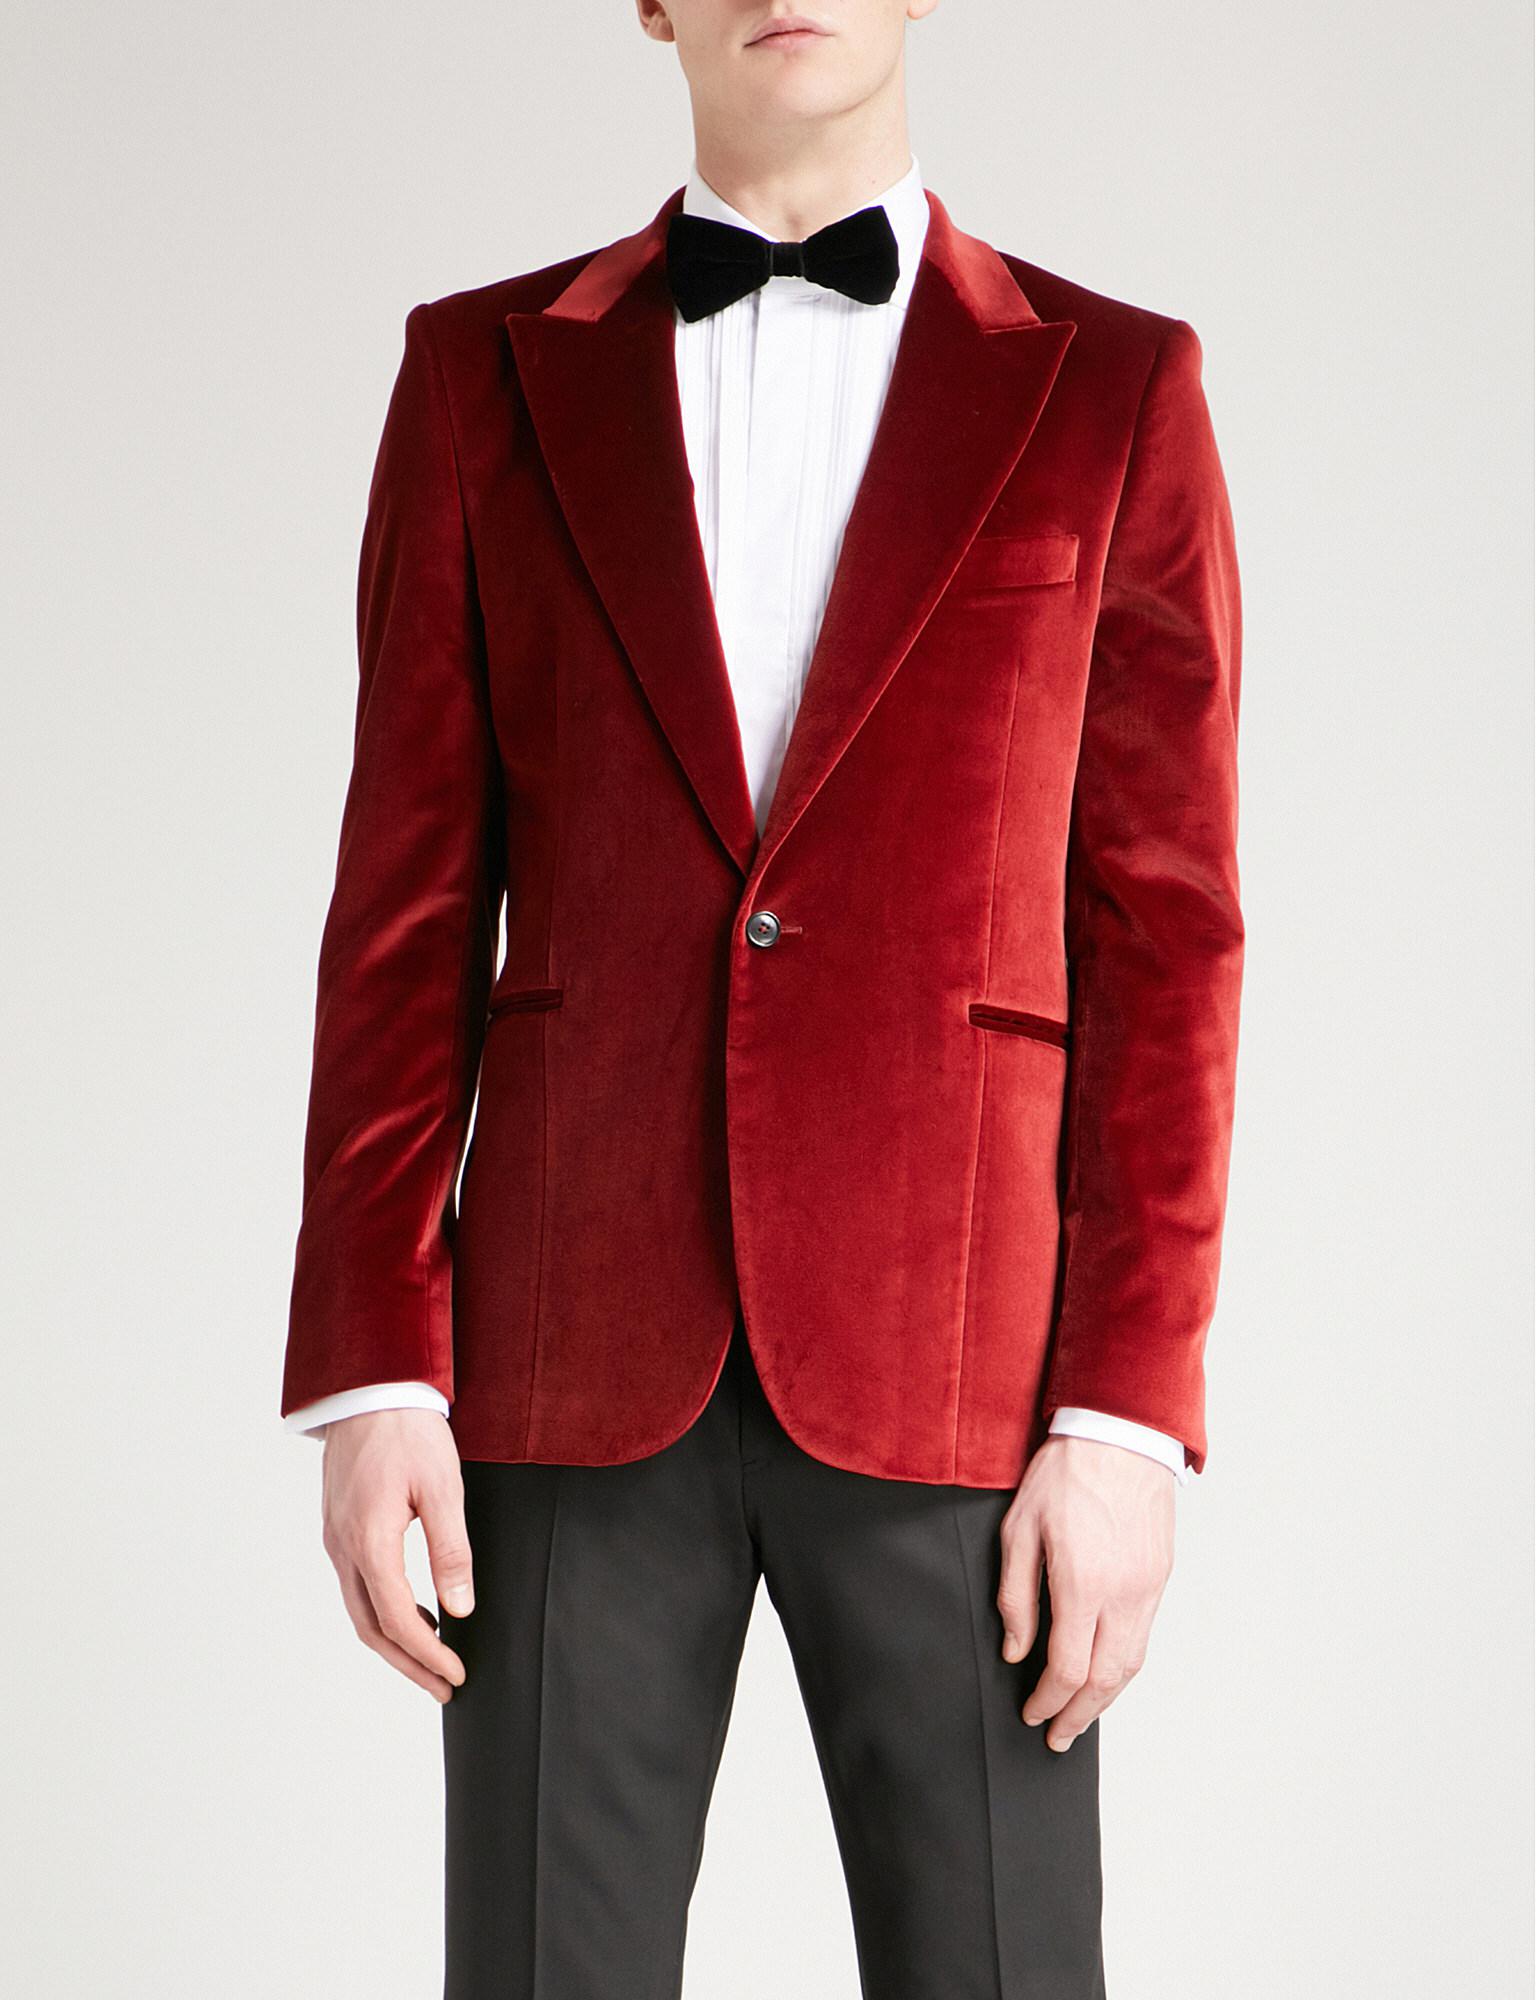 paul smith dinner jacket Promotions